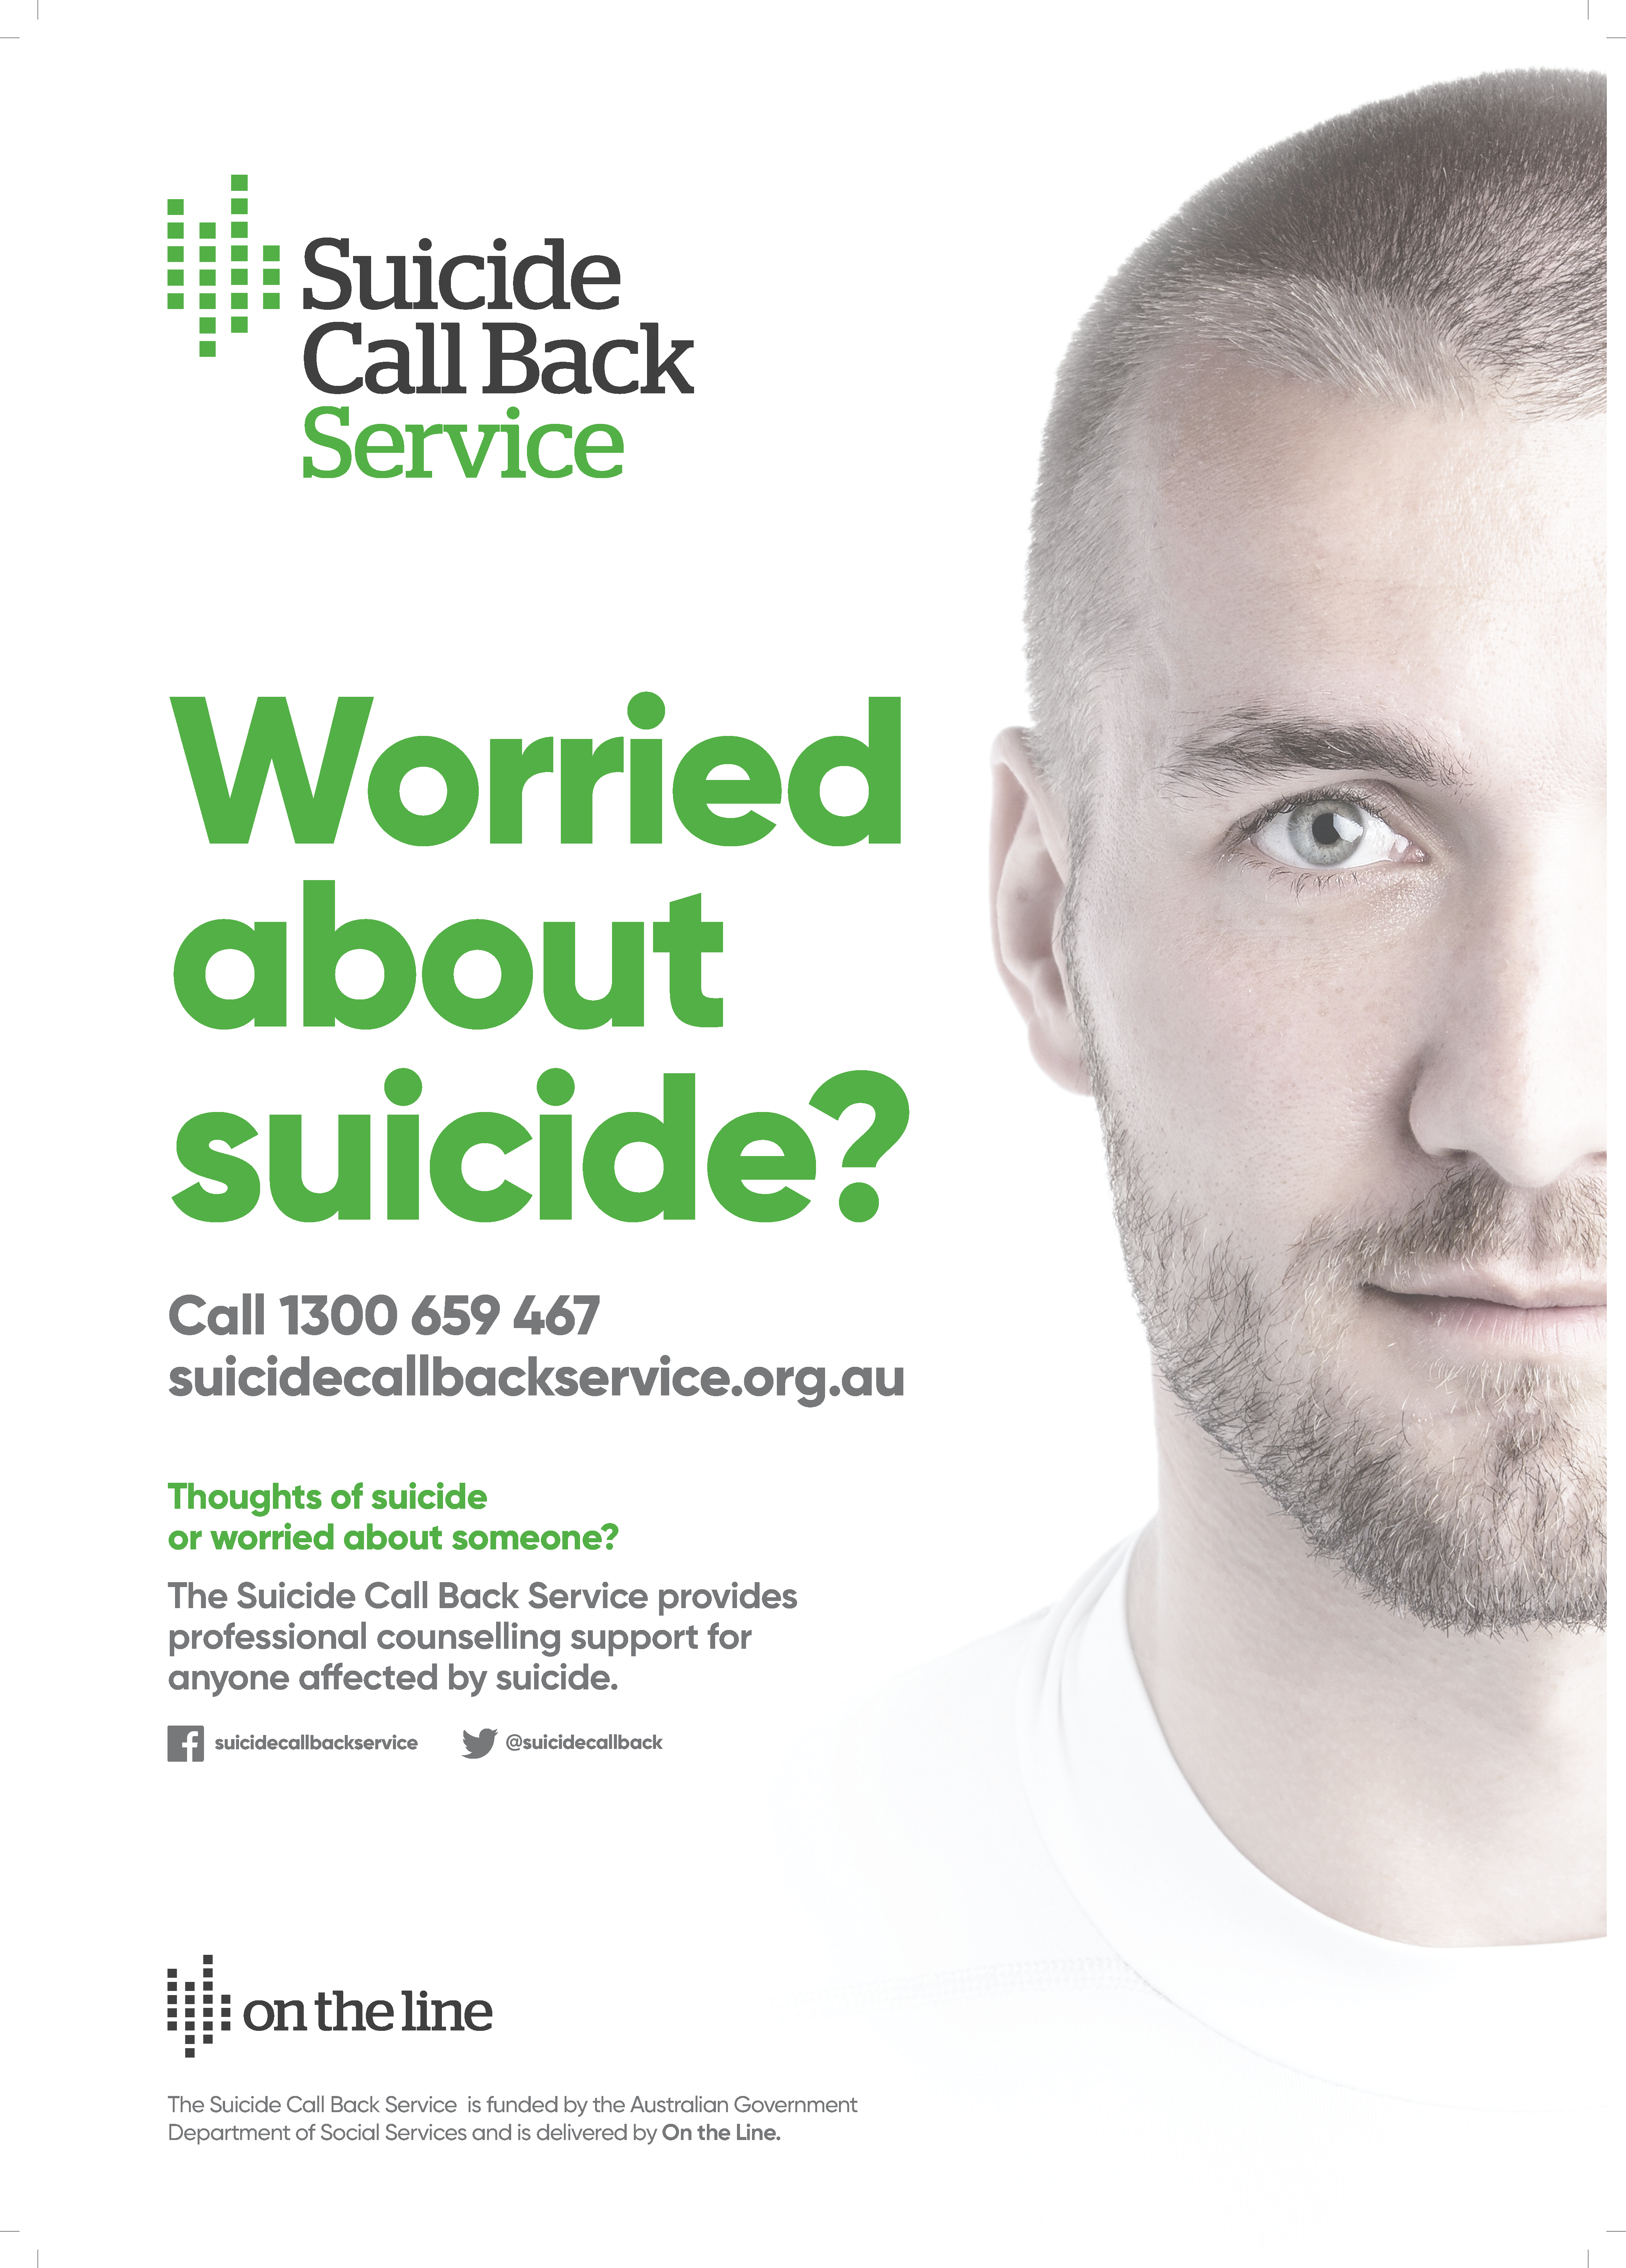 suicide call back service A4 flyer